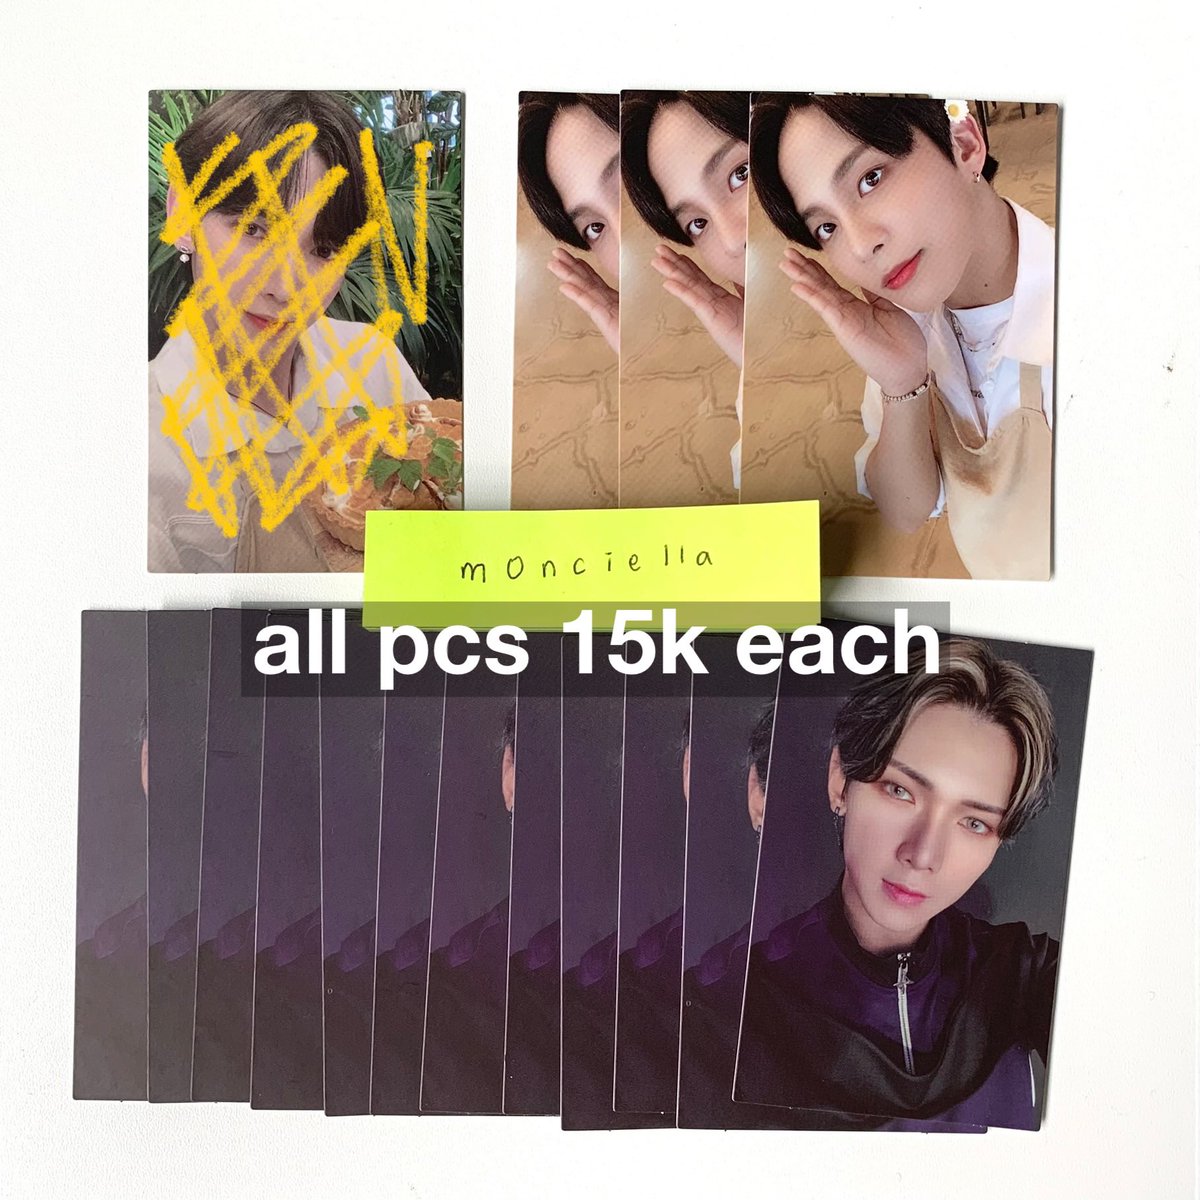 wts / lfb / want to sell

ateez san mingi jongho hongjoong wooyoung misc pcs id postcard n sticker
💵 in pict (IDR🇮🇩)

negotiable IF buy > 3 !
questions? dm

📍 tangerang selatan, ina
✅ ww buyers with ww address or ina address
t. 에이티즈 양도 #pasarateez #ateezwts #ateezsale